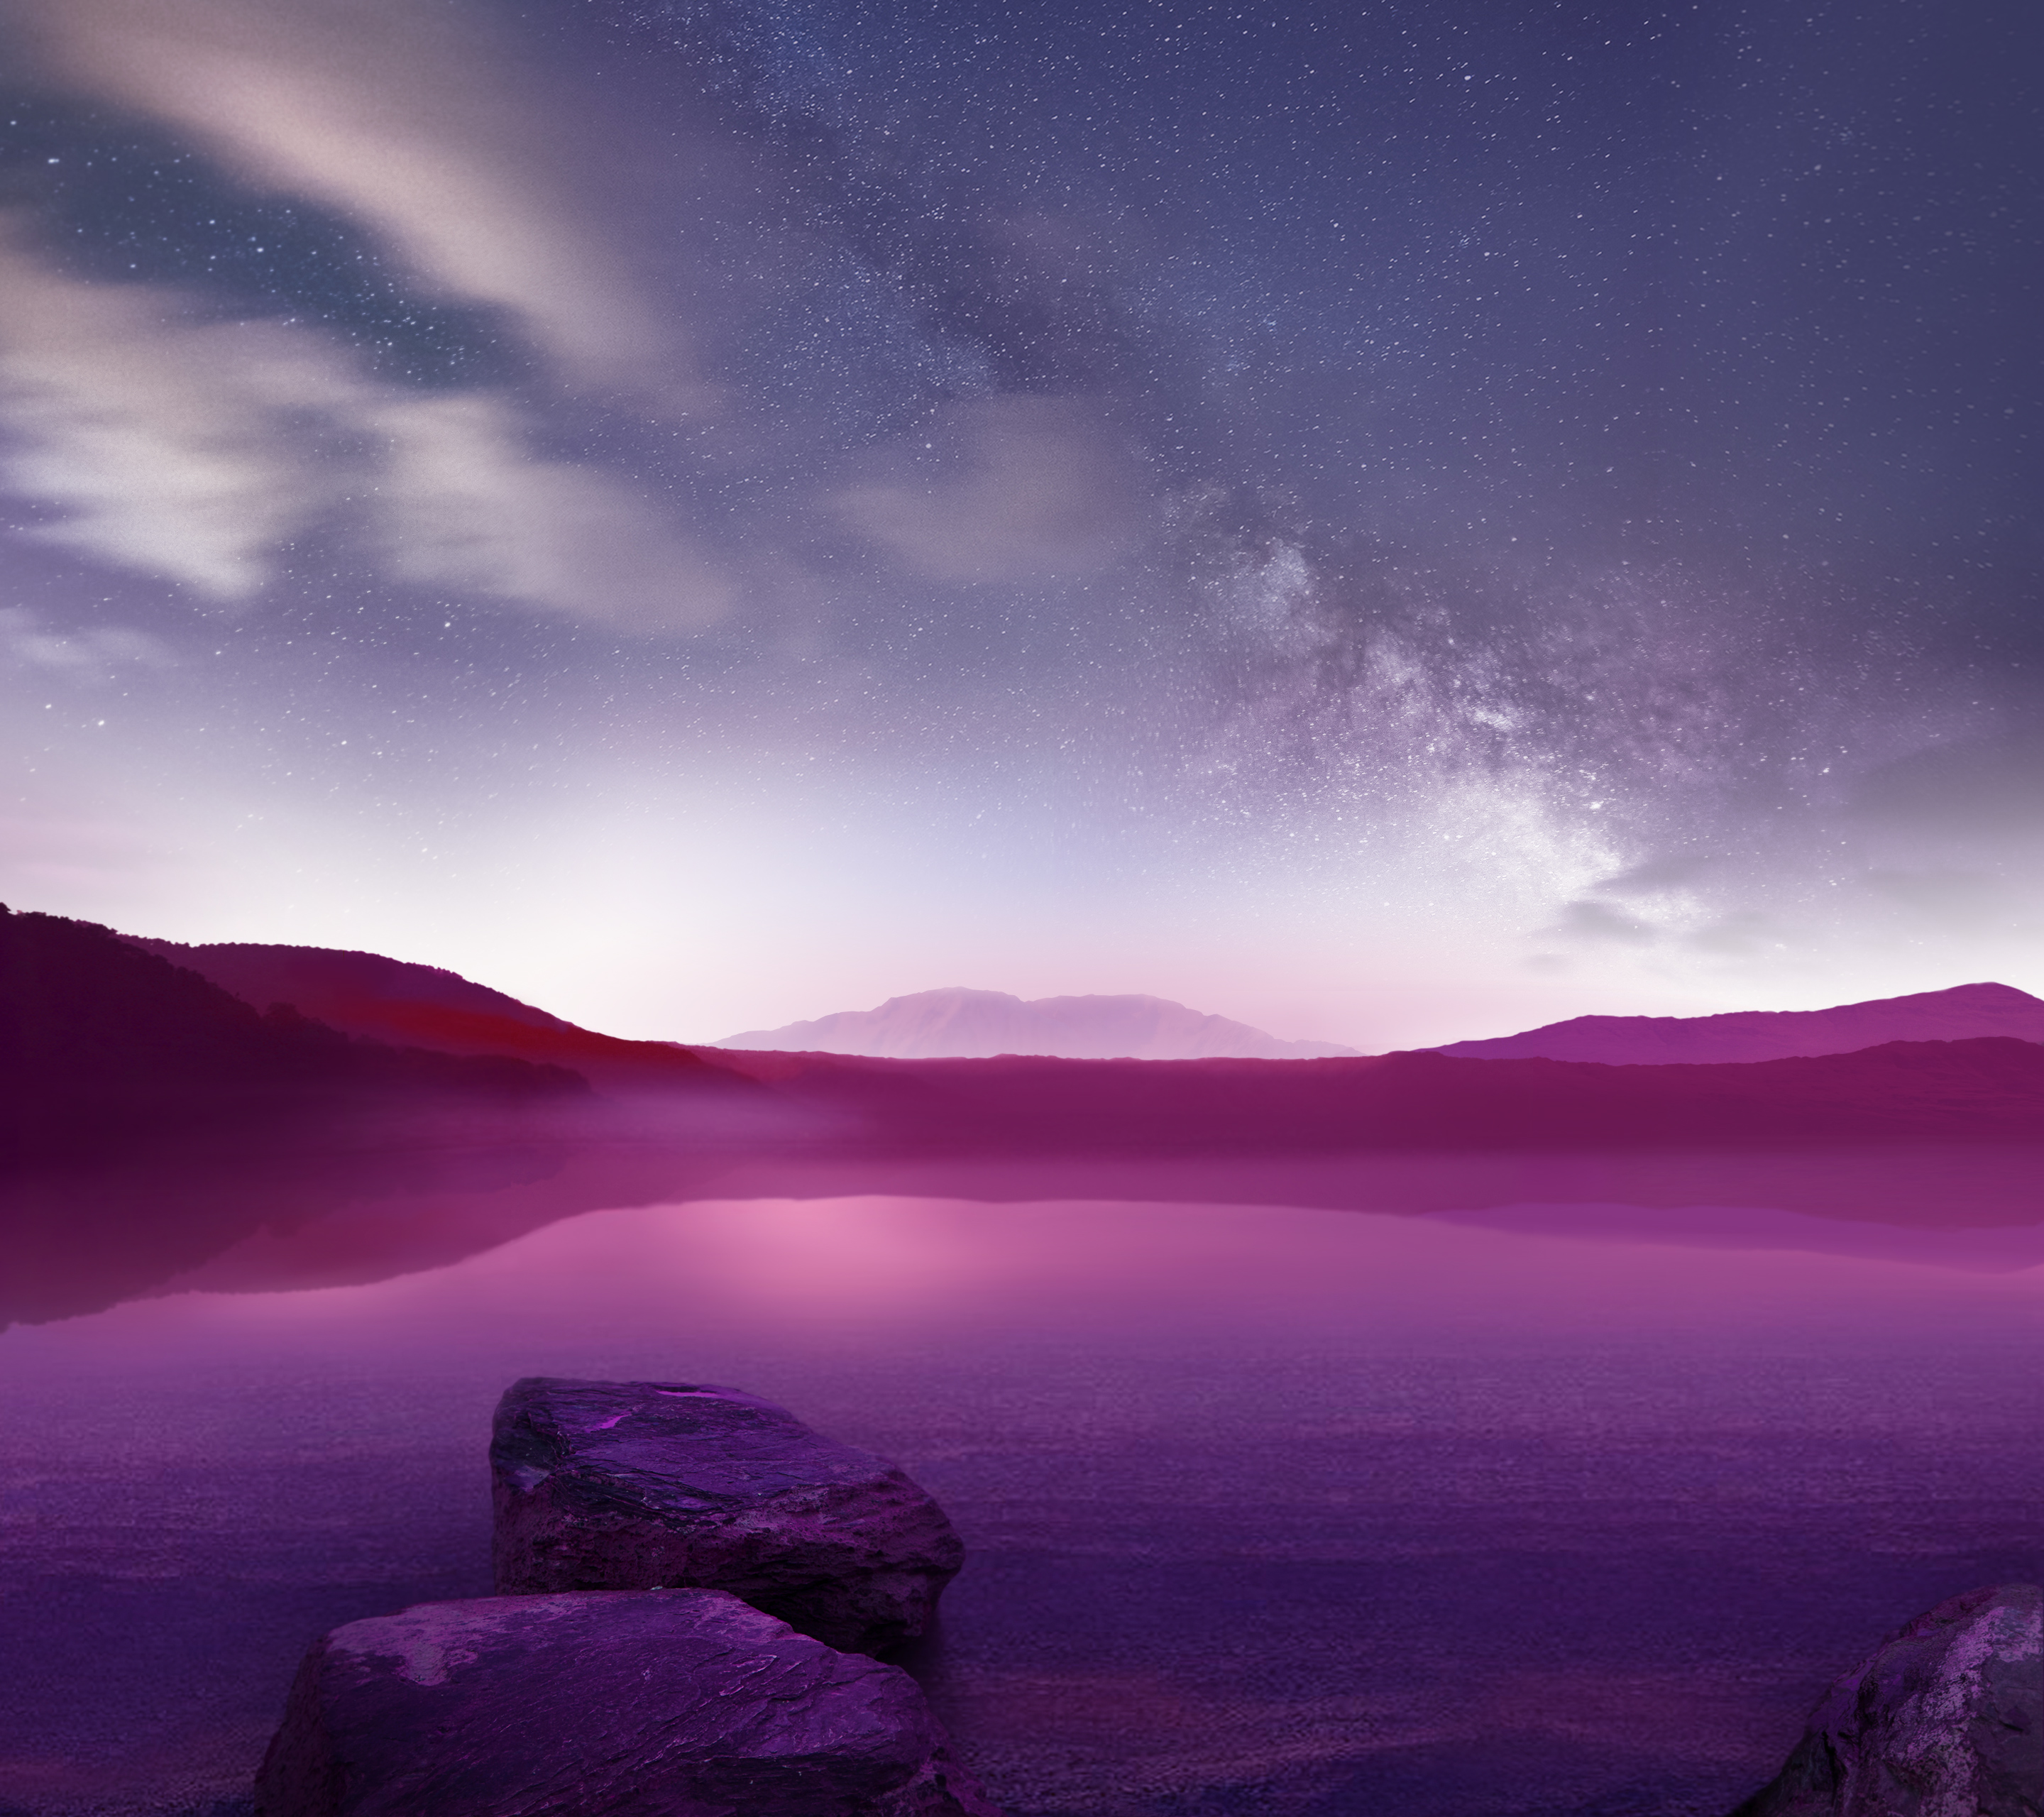 Download these LG G3 wallpapers for your phone